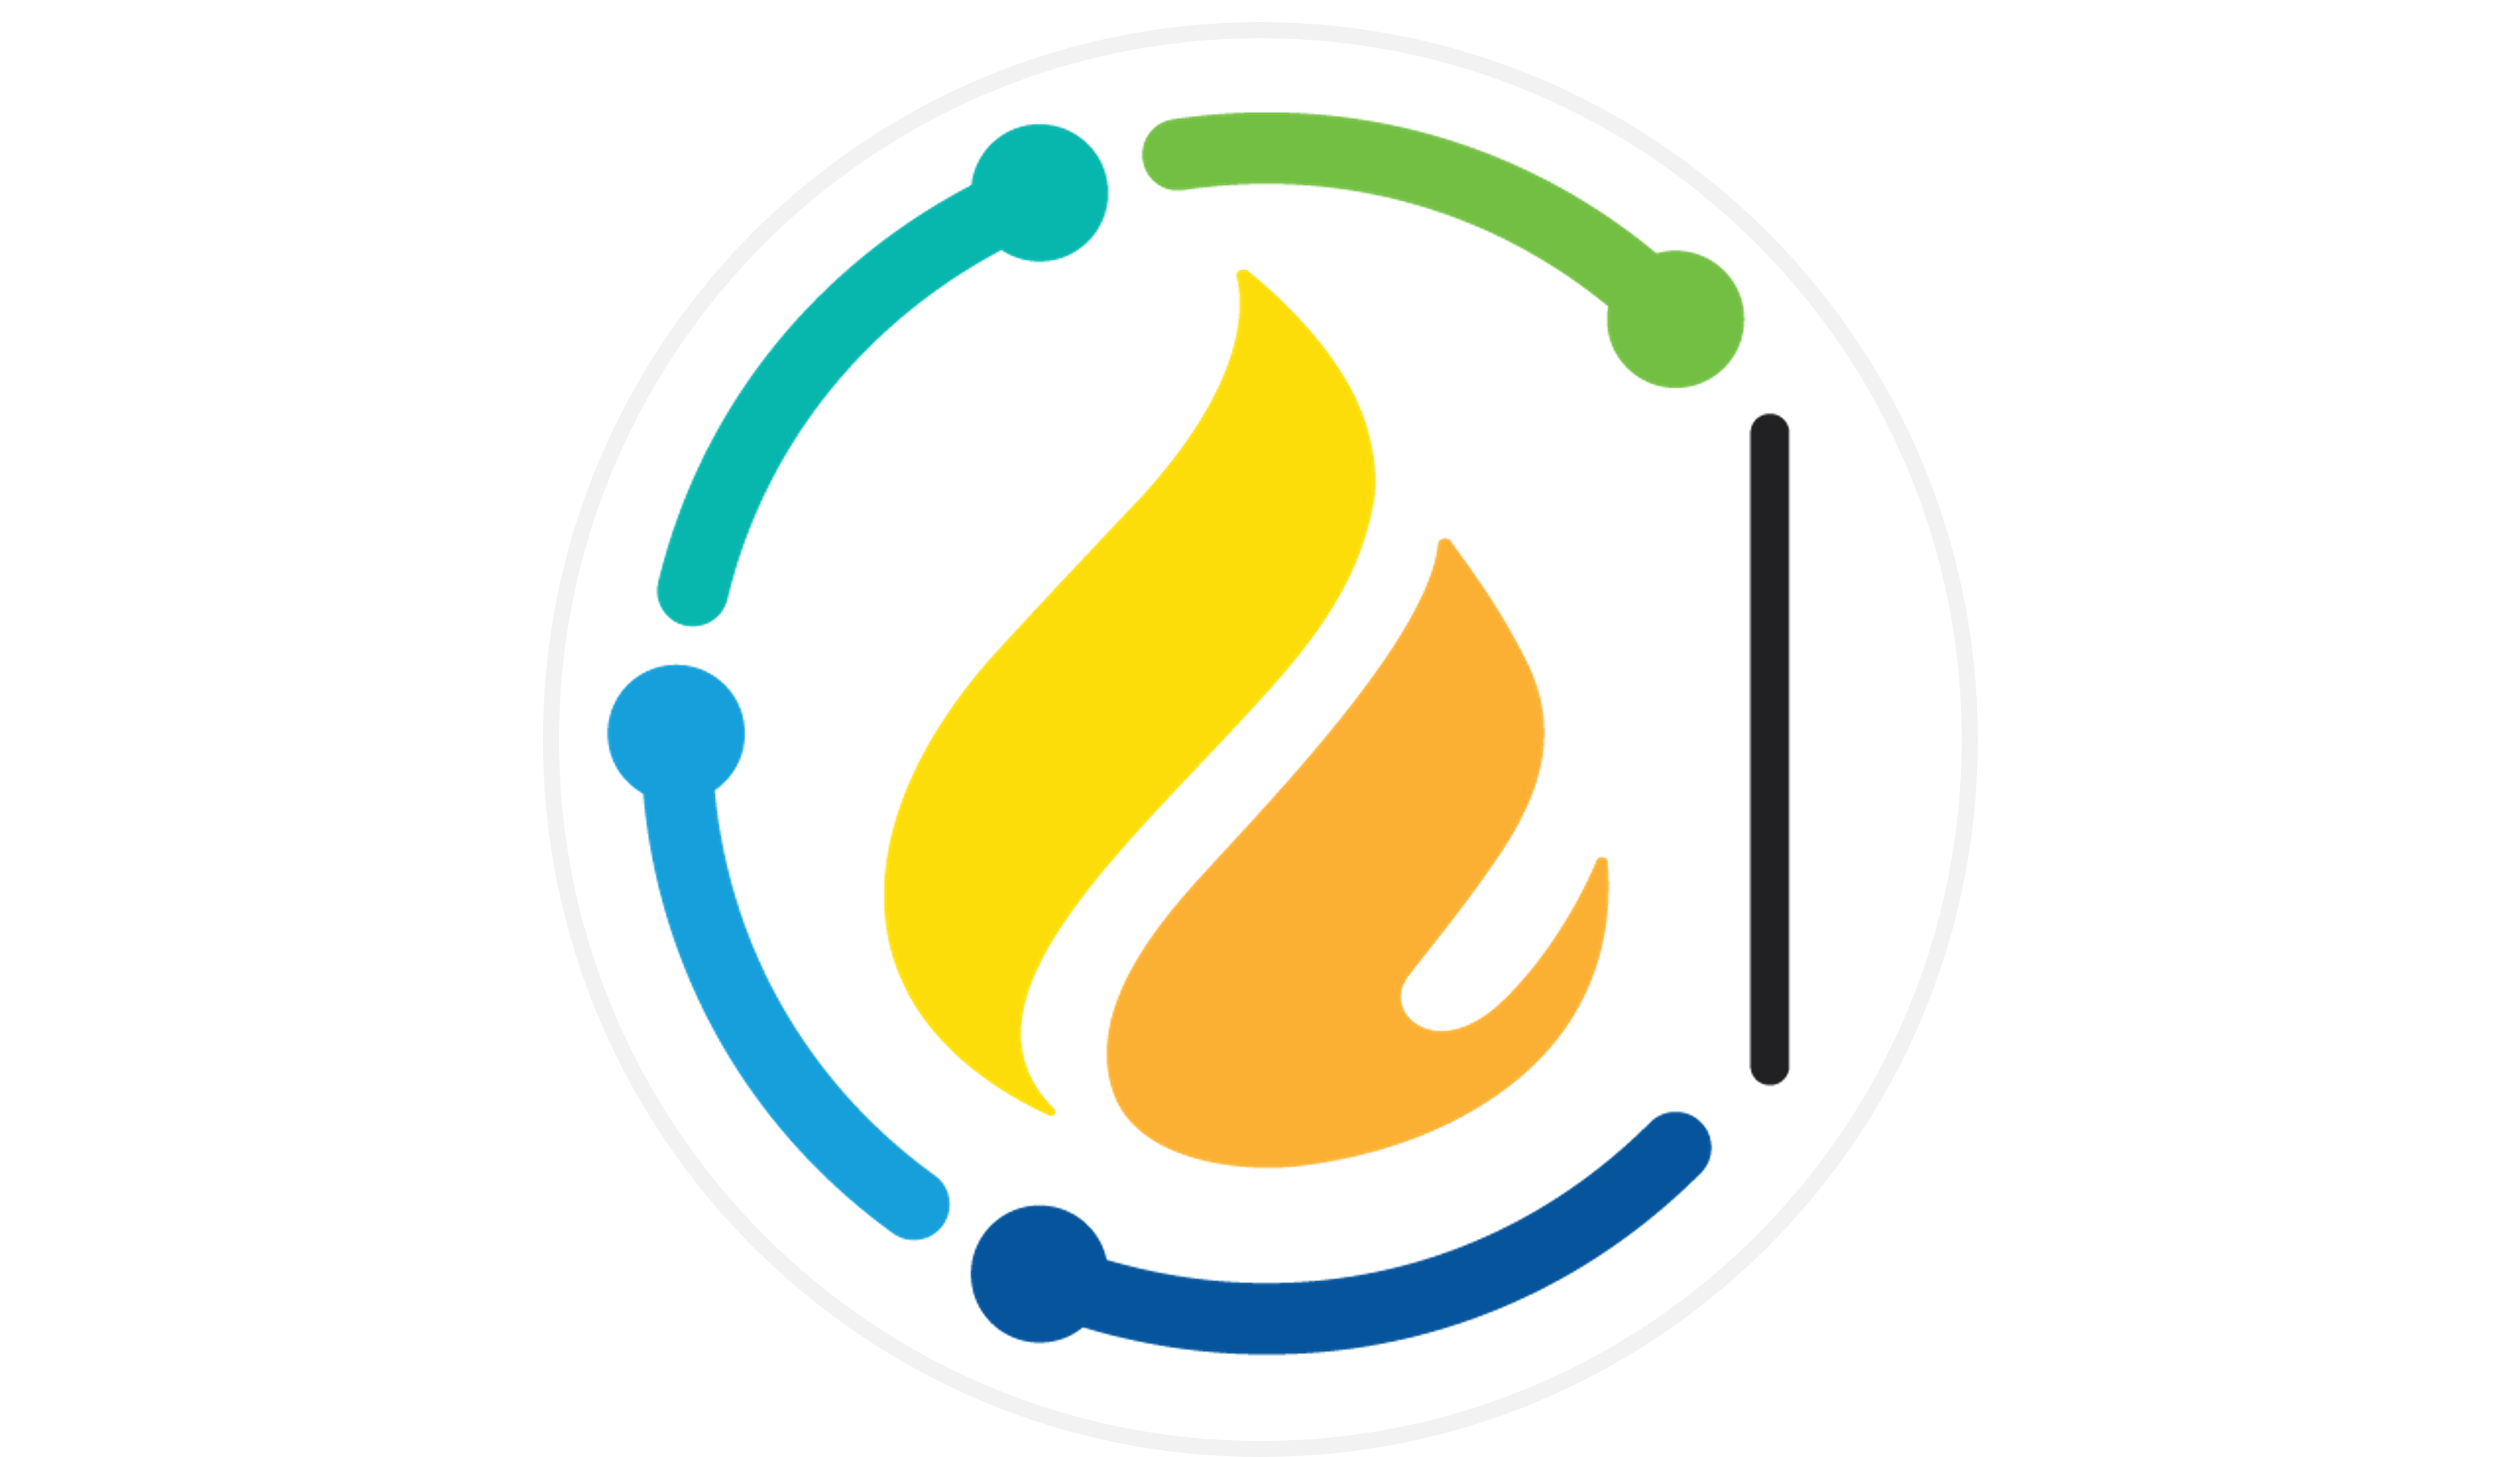 Icon of flame portion of the Data and Analytics Workshop logo